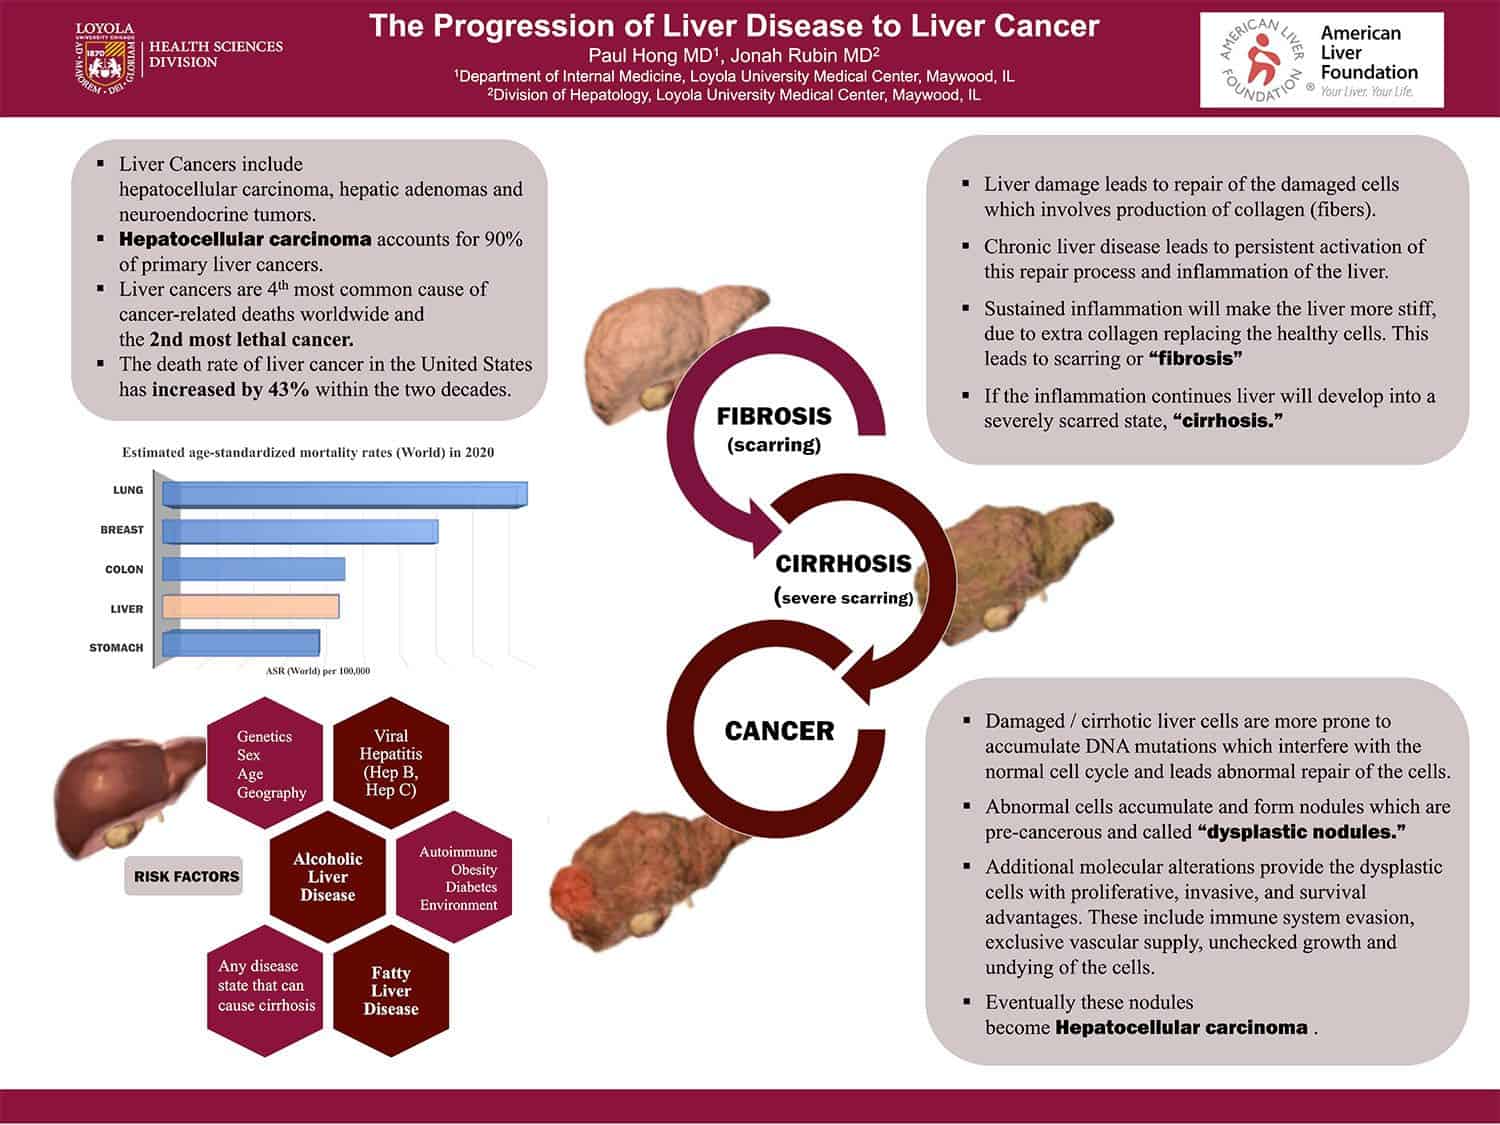 research article about liver cancer